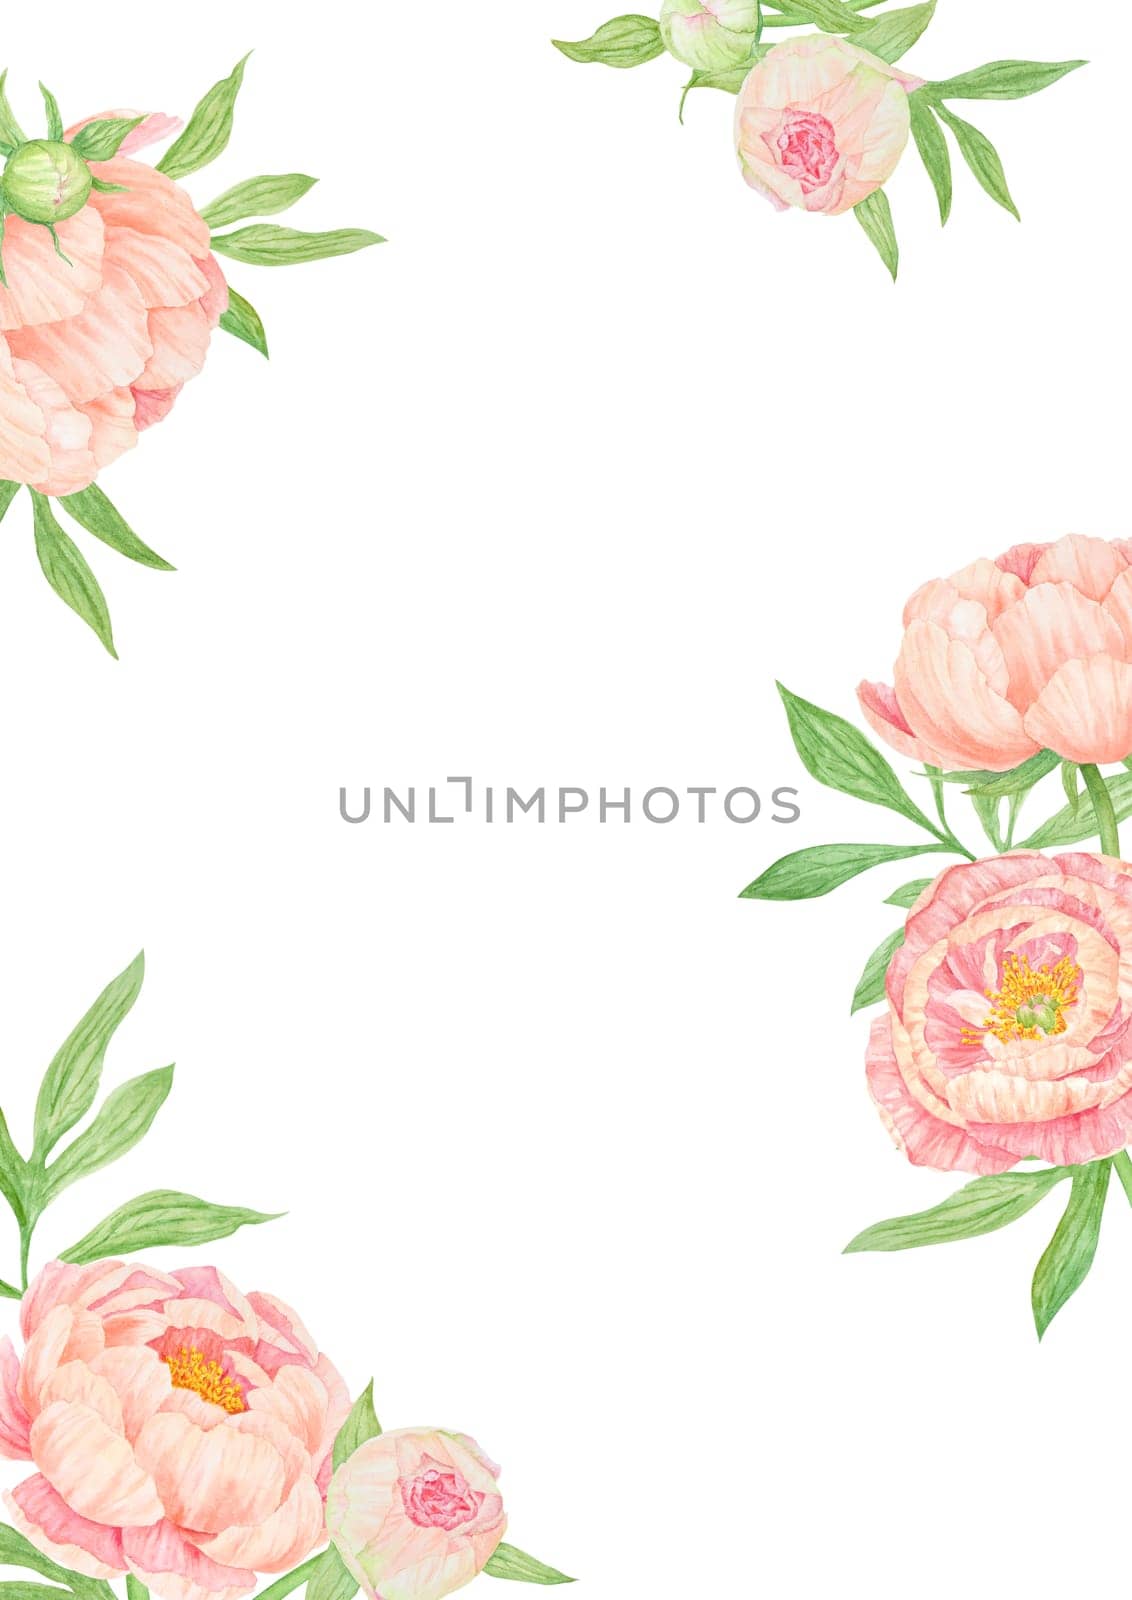 Peach peony bouquet watercolor hand drawn frame. Chinese national symbol illustration. Realistic flower clipart, floral arrangement for card design, wedding invitation, prints, textile, packing by florainlove_art